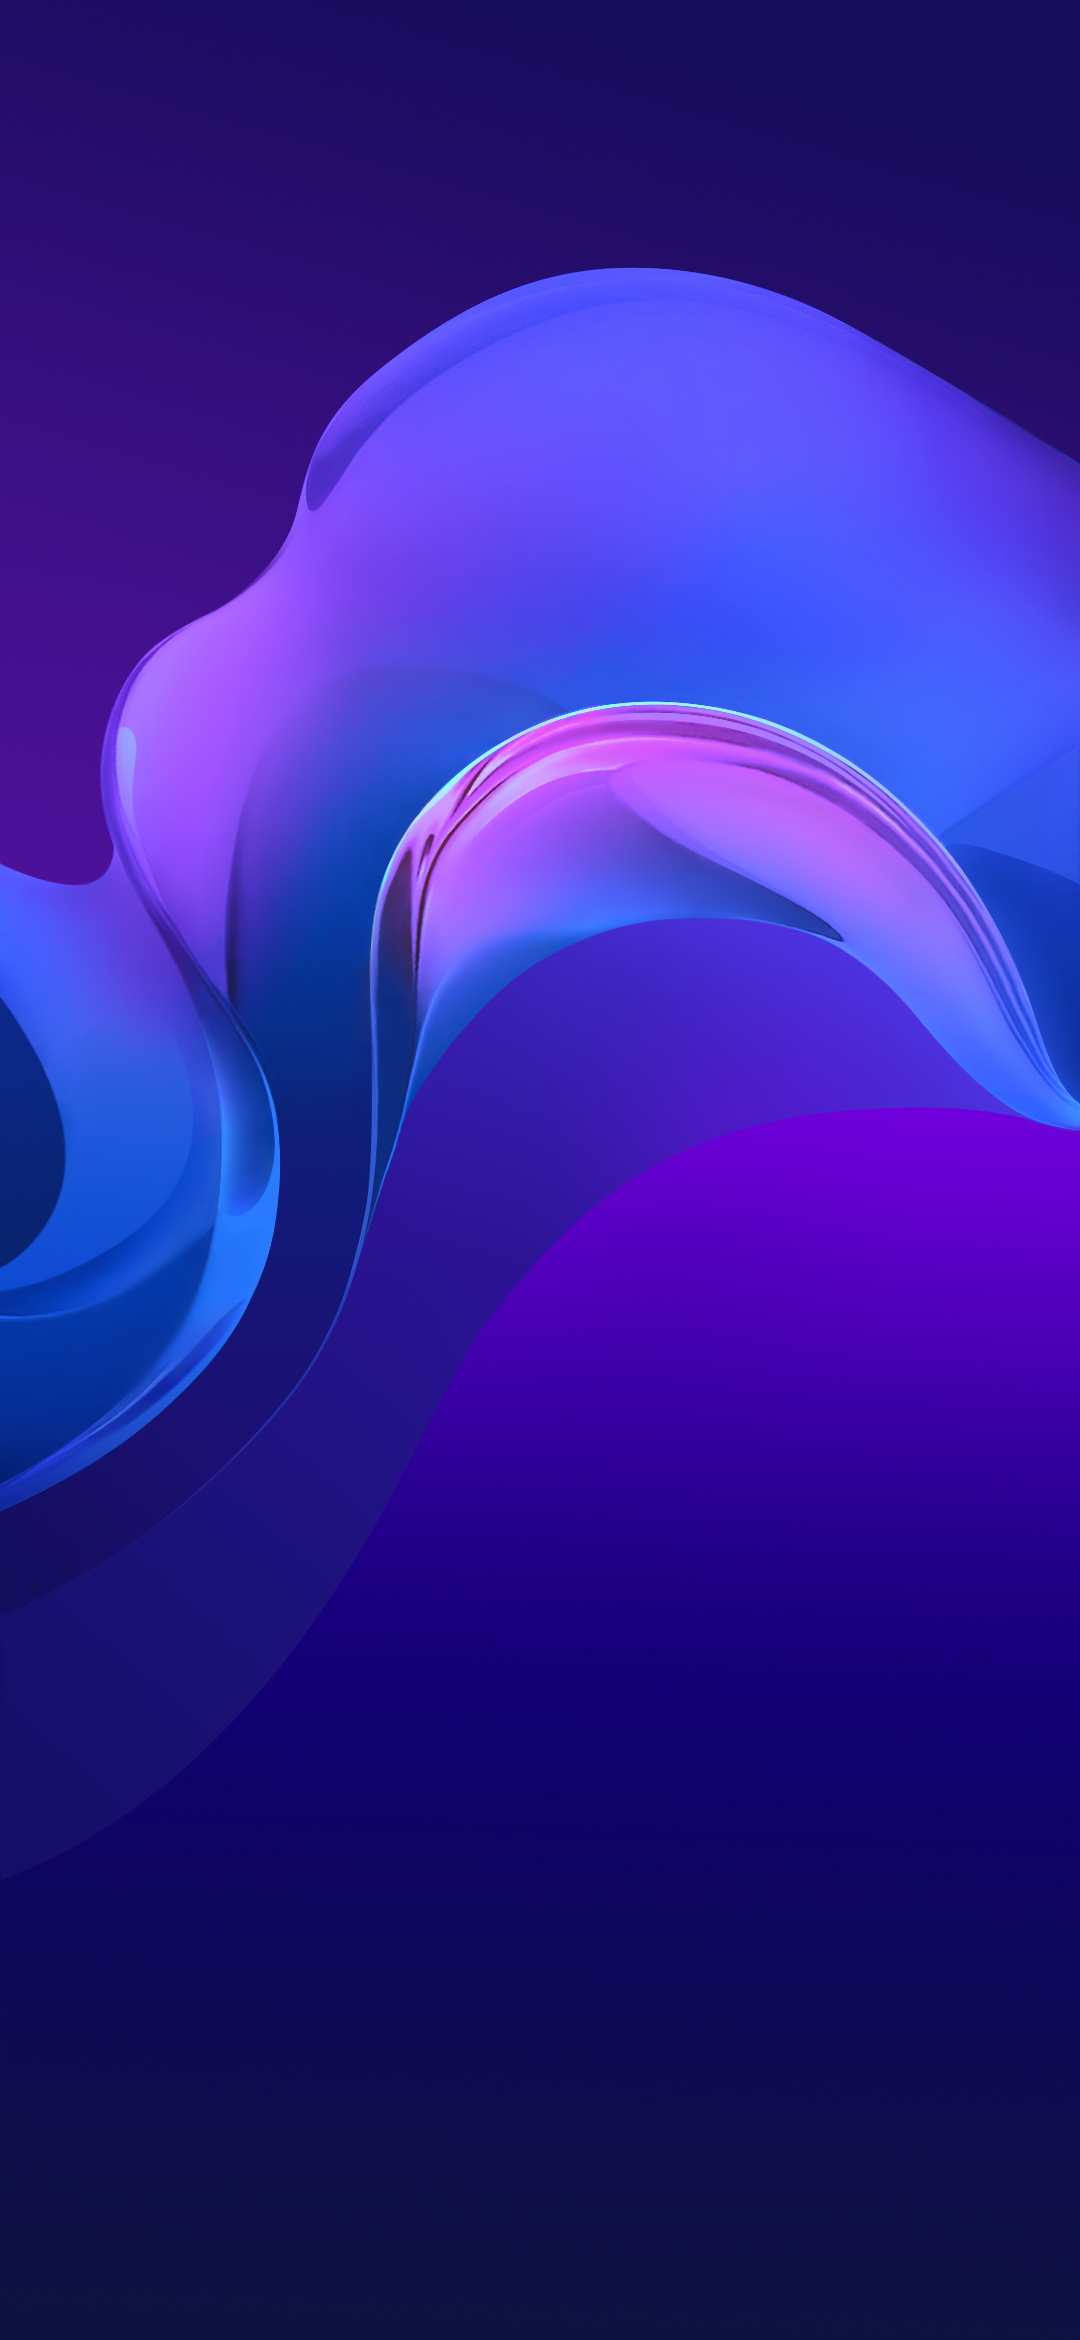 Abstract Wallpaper 3D HD Wallpaper For Mobile Free Download